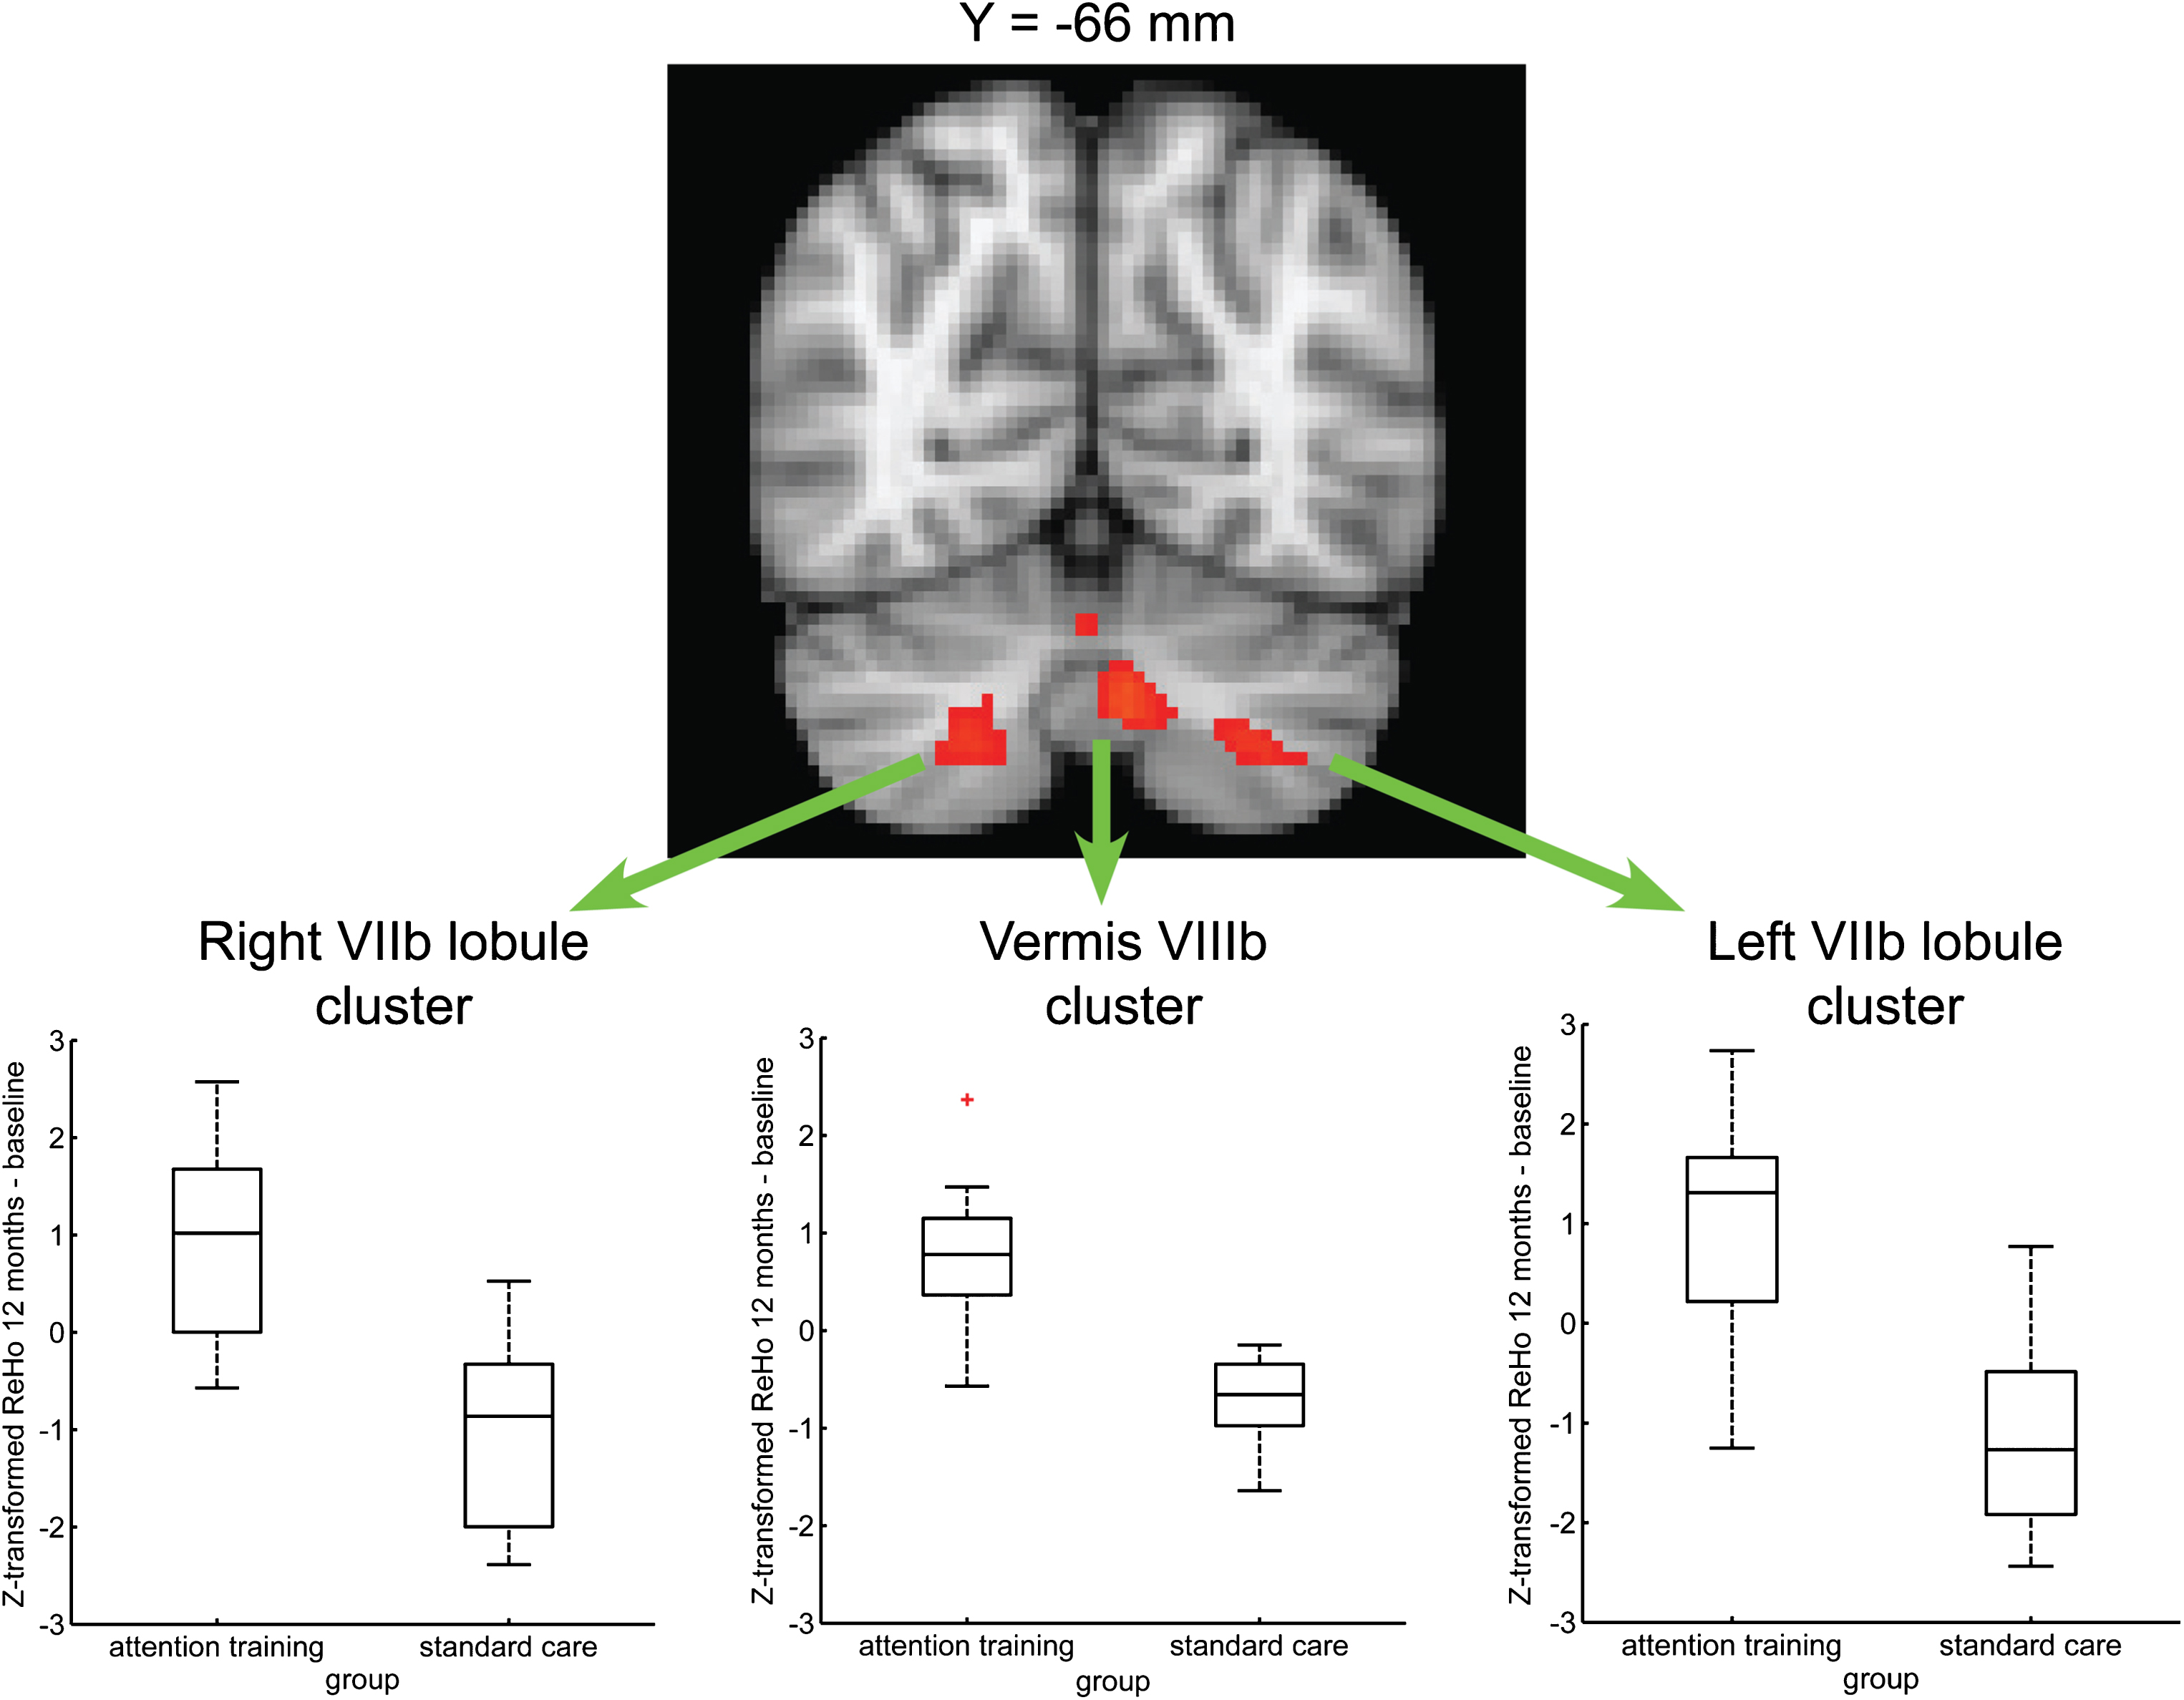 Improvement in long-term brain activity measured by ReHo of rsfMRI data. Between-group voxel-wise map (TFCE) showing significant (p < 0.05, corrected) evidence for a greater Z-transformed ReHo difference (12 months – baseline) in cerebellar areas (vermis VIIIb and bilateral VIIb lobule) involved in cognitive processes in the attention training group as compared to standard care group. The map is overlaid on the MNI152 template. In each cluster, the mean of the difference of the Z-transformed ReHo was positive for the attention training group (ReHo increased over time) and negative for the standard care group (ReHo decreased over time).